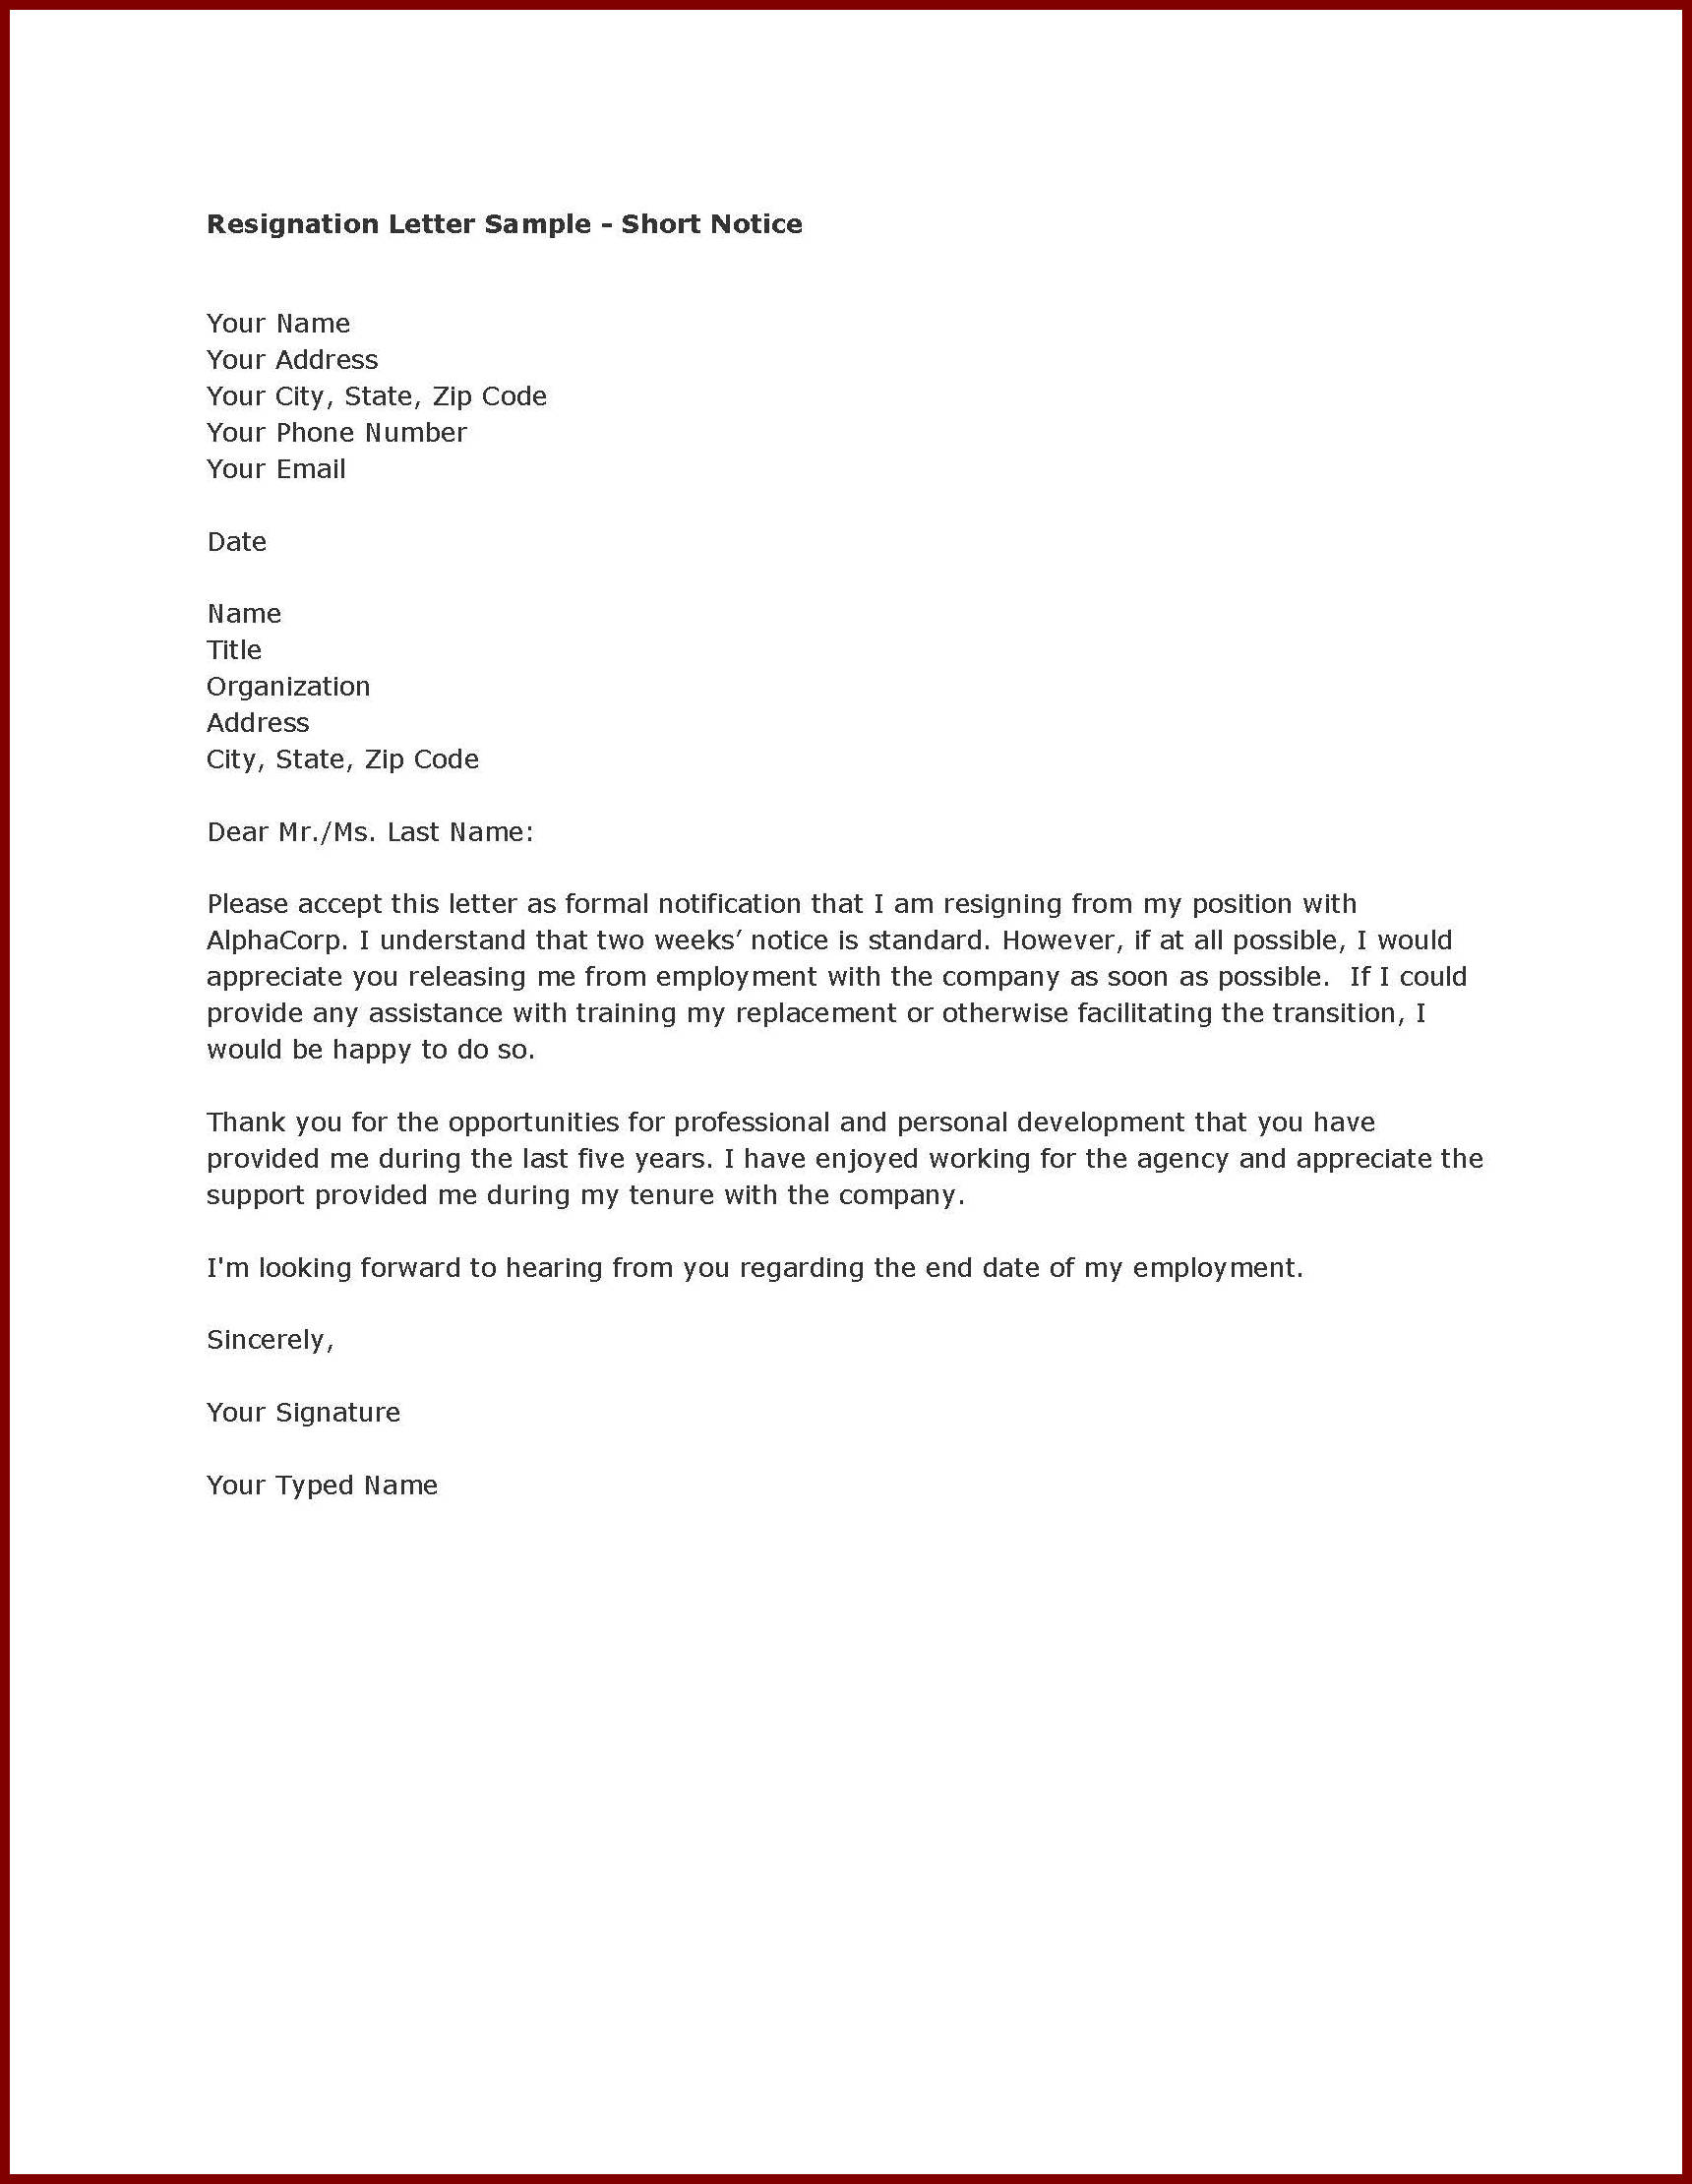 Resignation Letter : Samples Of Resignation Letter With Notice 